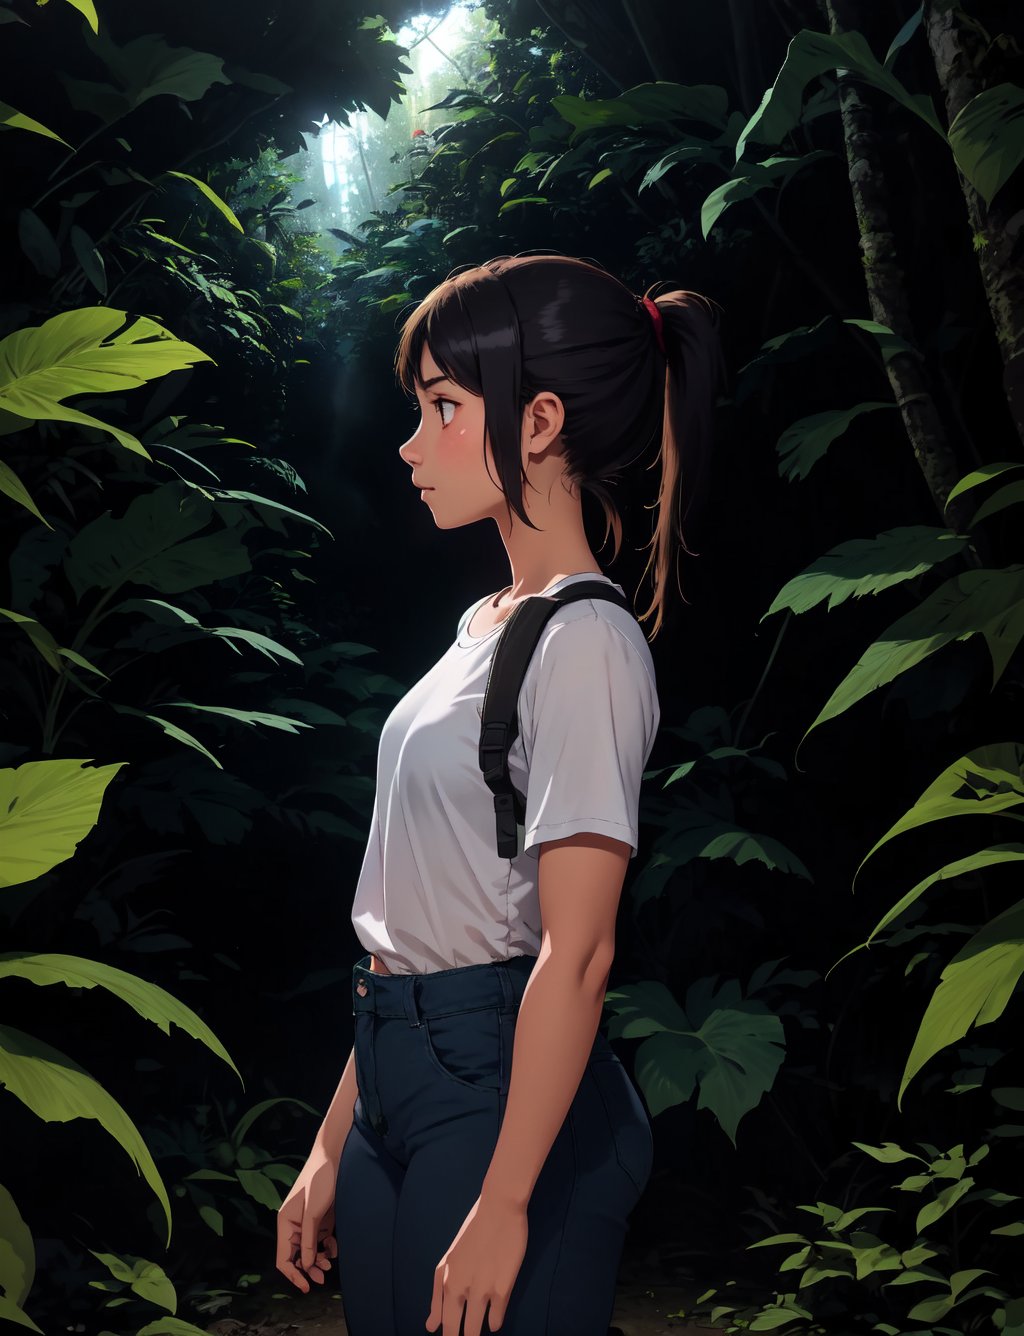 A young girl stands confidently at the edge of a dense jungle, her eyes fixed on some unseen distance. She wears a pair of durable pants shorts and a comfortable-looking shirt, her dark hair tied back in a practical ponytail. The darkness of the jungle night surrounds her, with only the faintest hint of starlight visible above the treetops. The air is thick with the sounds of nocturnal creatures, and the girl's profile is illuminated by the soft glow of a nearby firefly, casting an intimate, golden light on her determined expression.